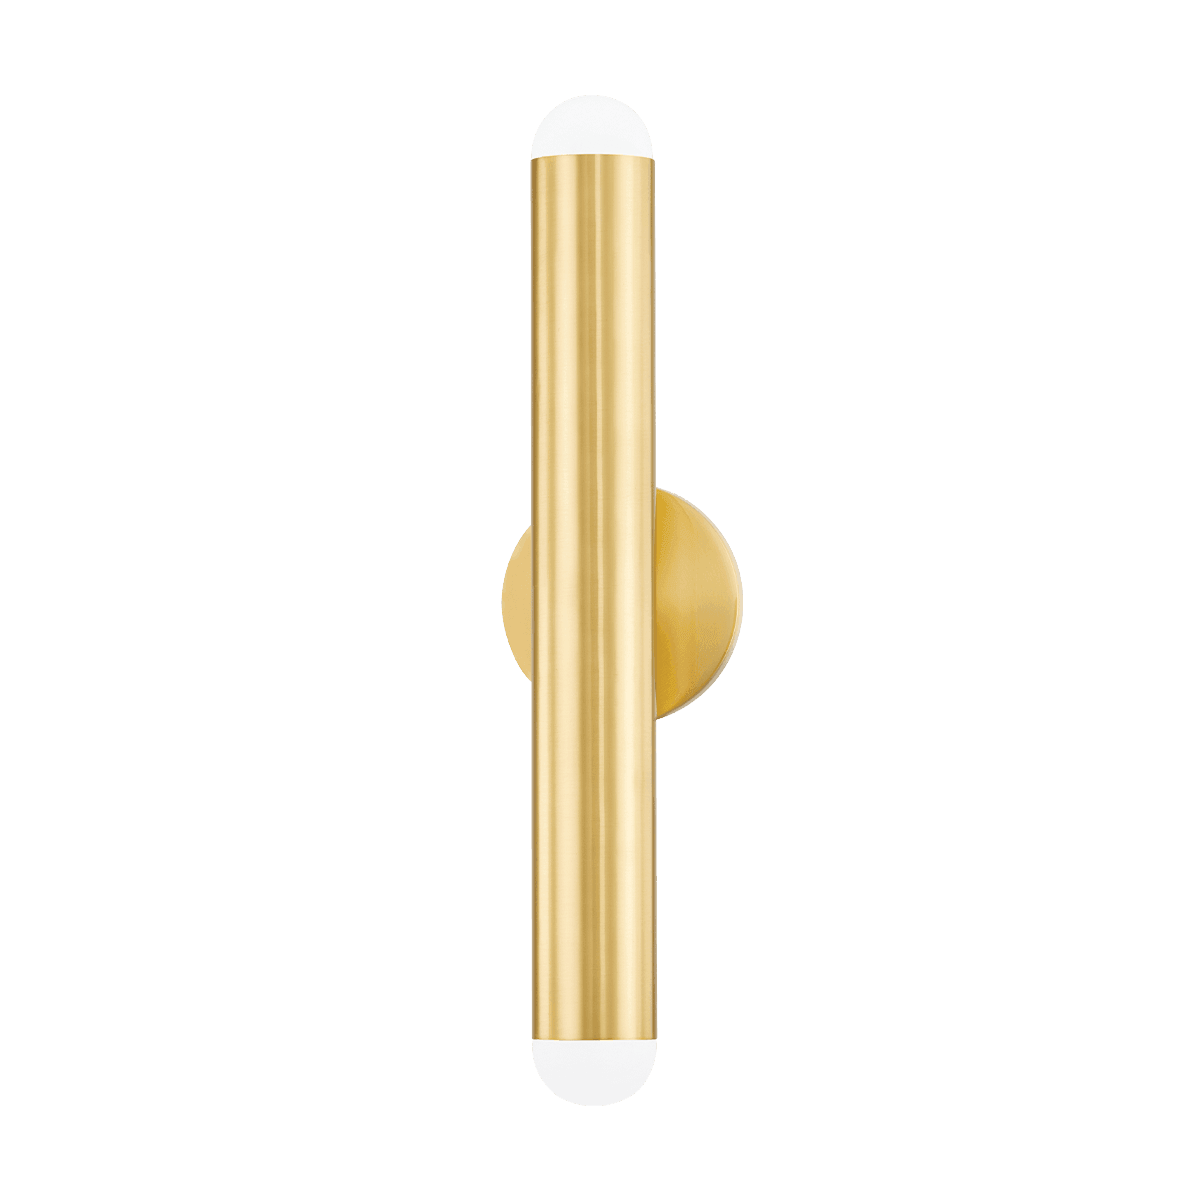 Mitzi - Taylor Wall Sconce - H602102-AGB | Montreal Lighting & Hardware